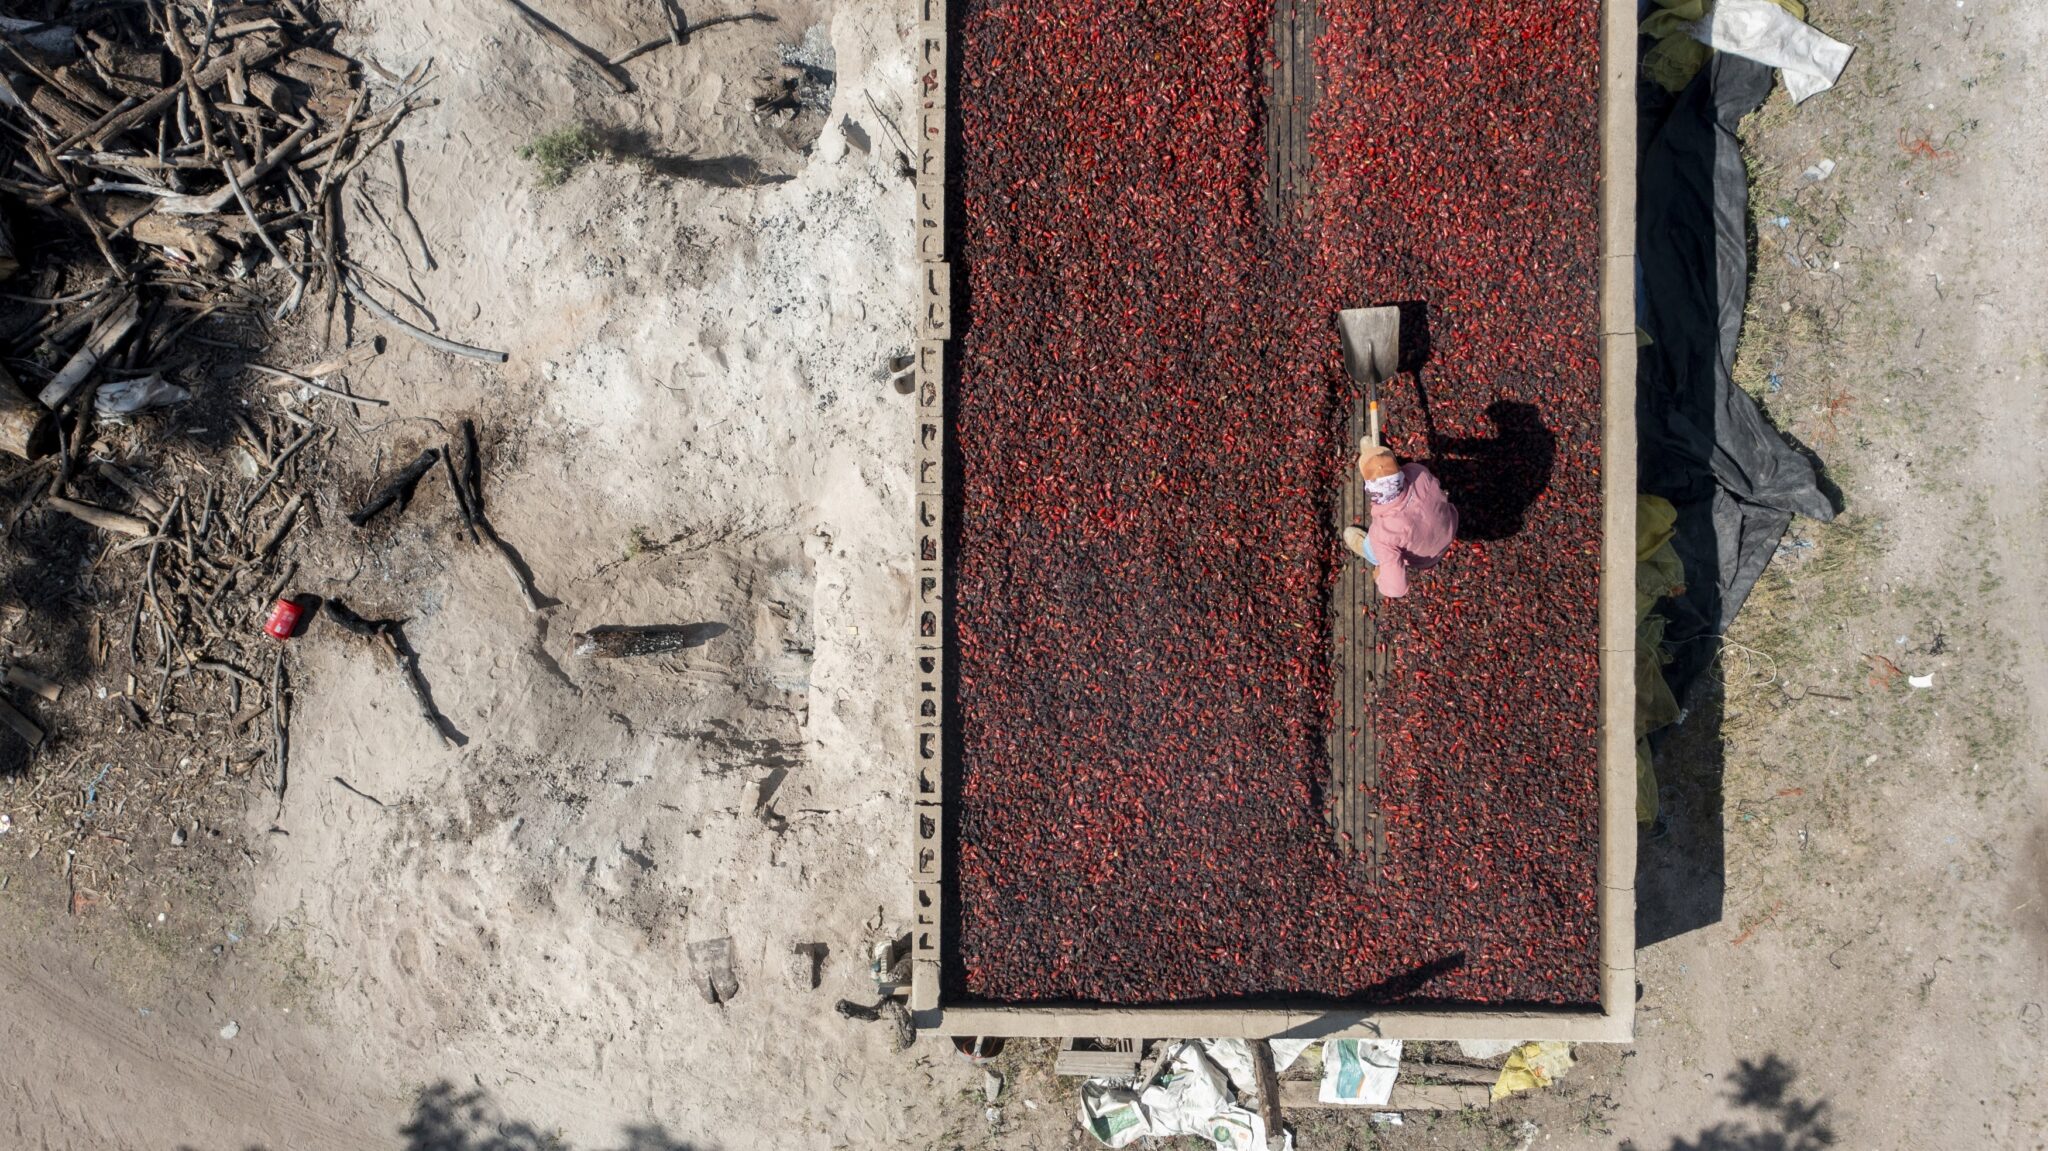 Seen from overhead, a worker shovels a massive firepit full of bright red and black drying peppers.